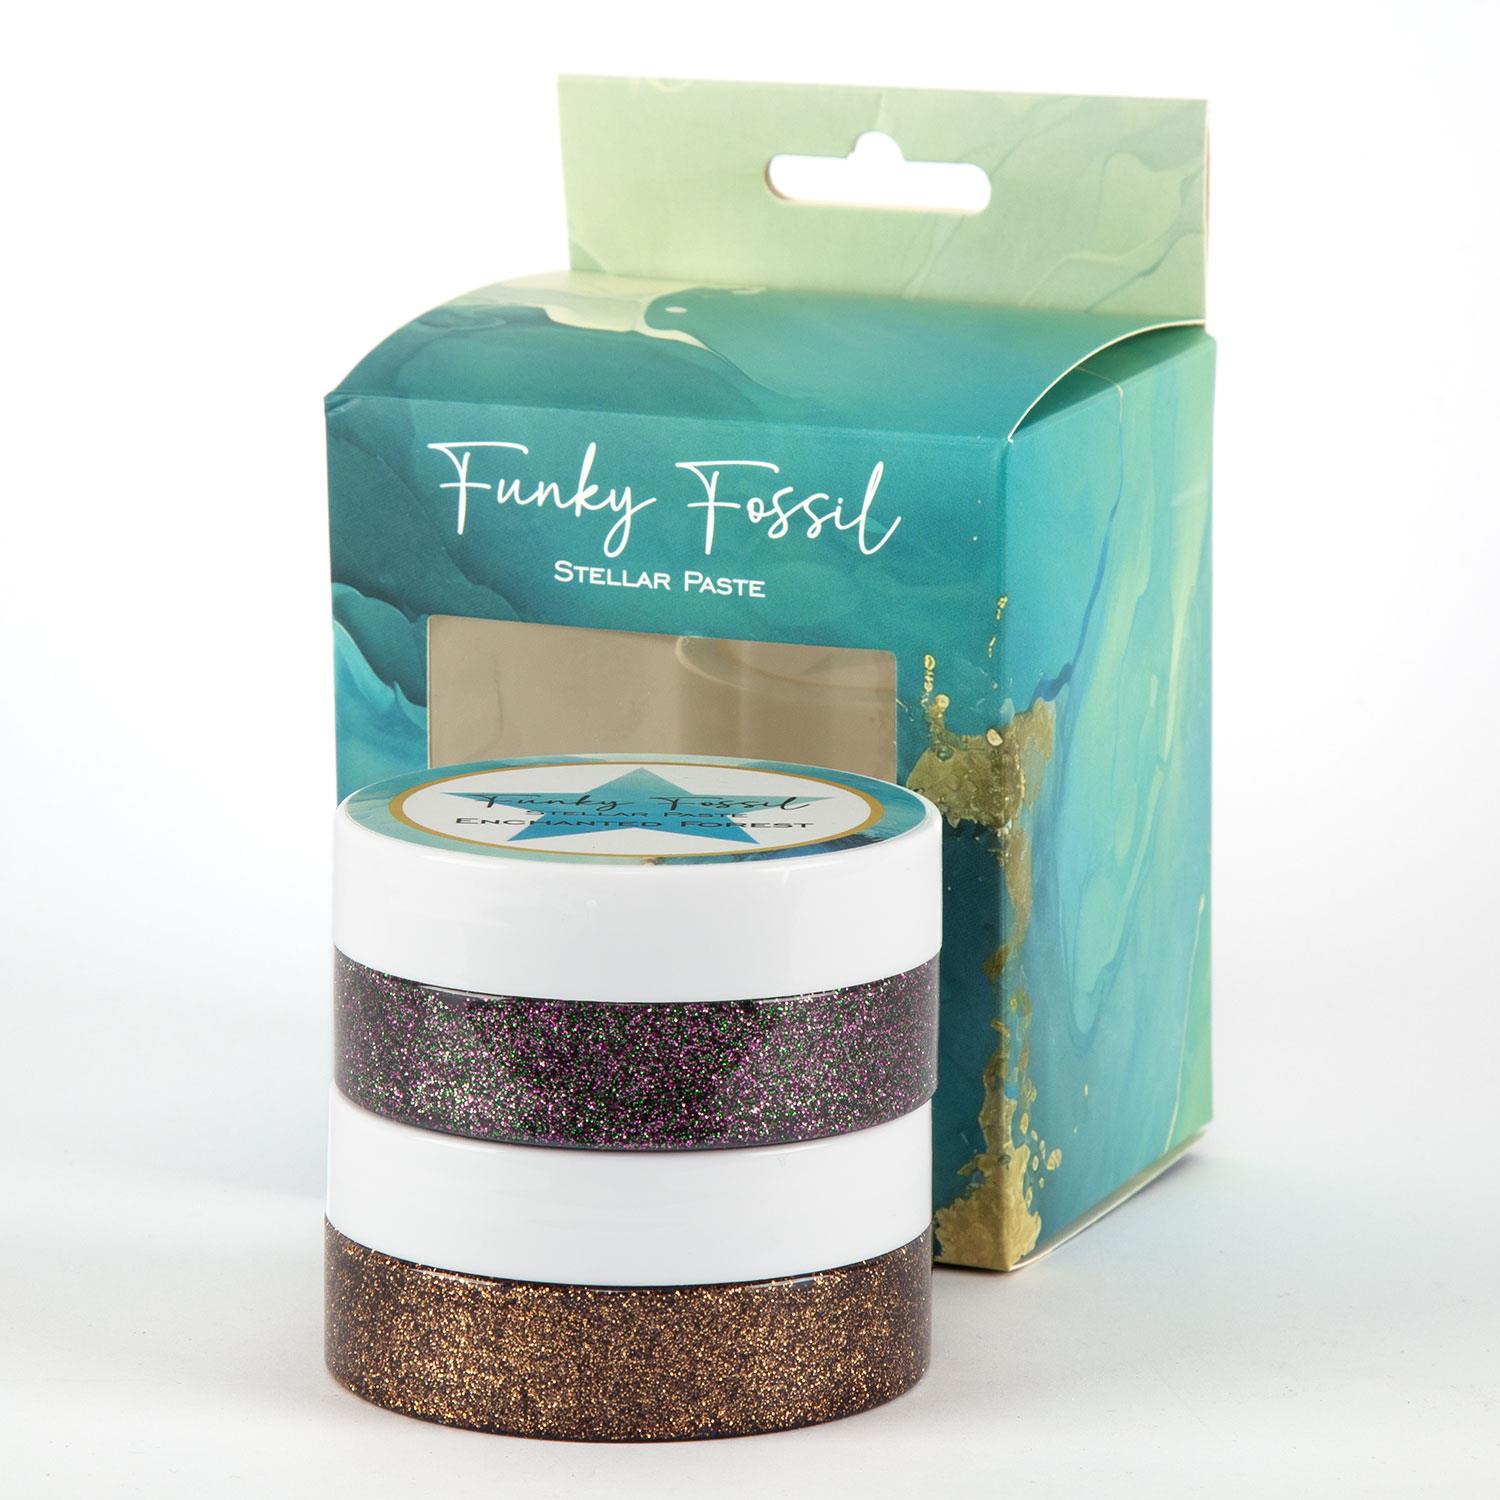 Funky Fossil Stellar Paste Pick-N-Mix - Choose Any 2 - Enchanted Forest & Spellbound